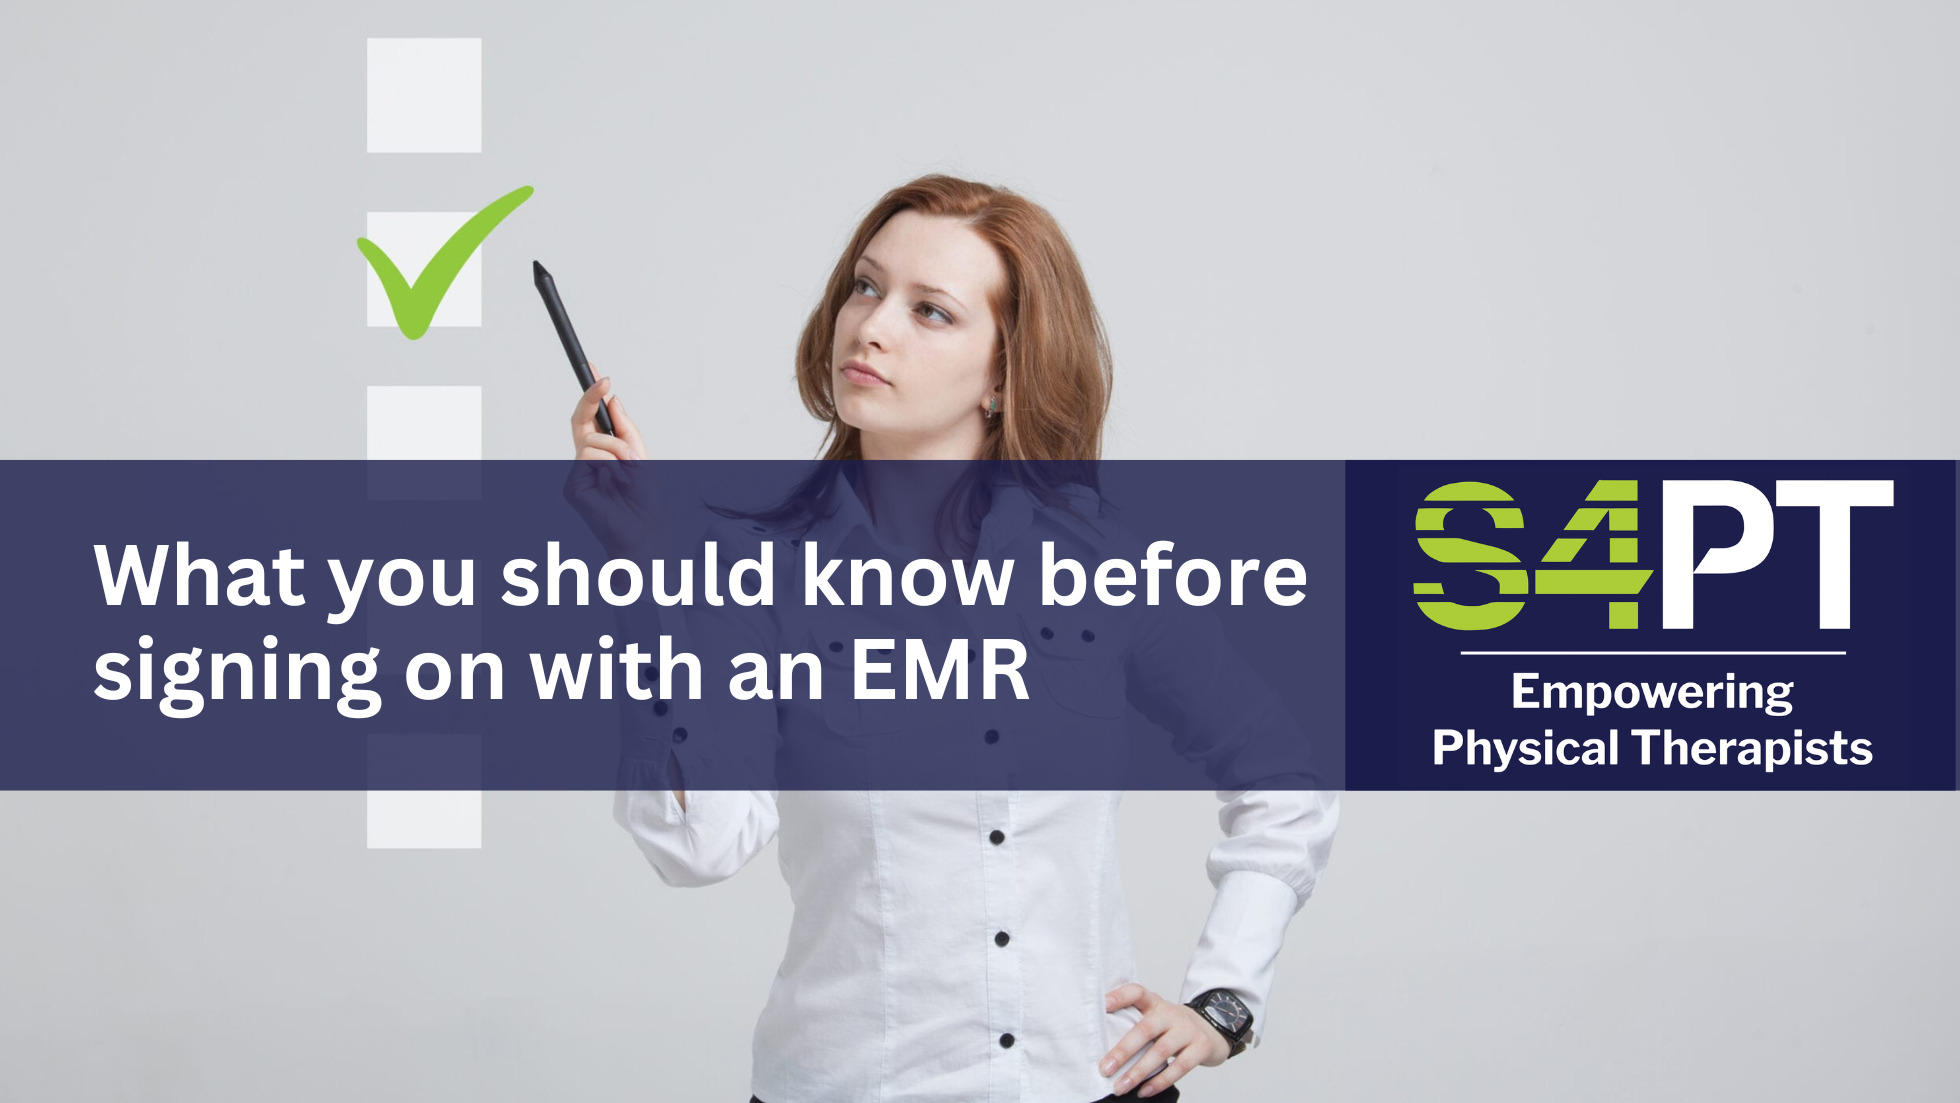 What-to-know-before-EMR-header